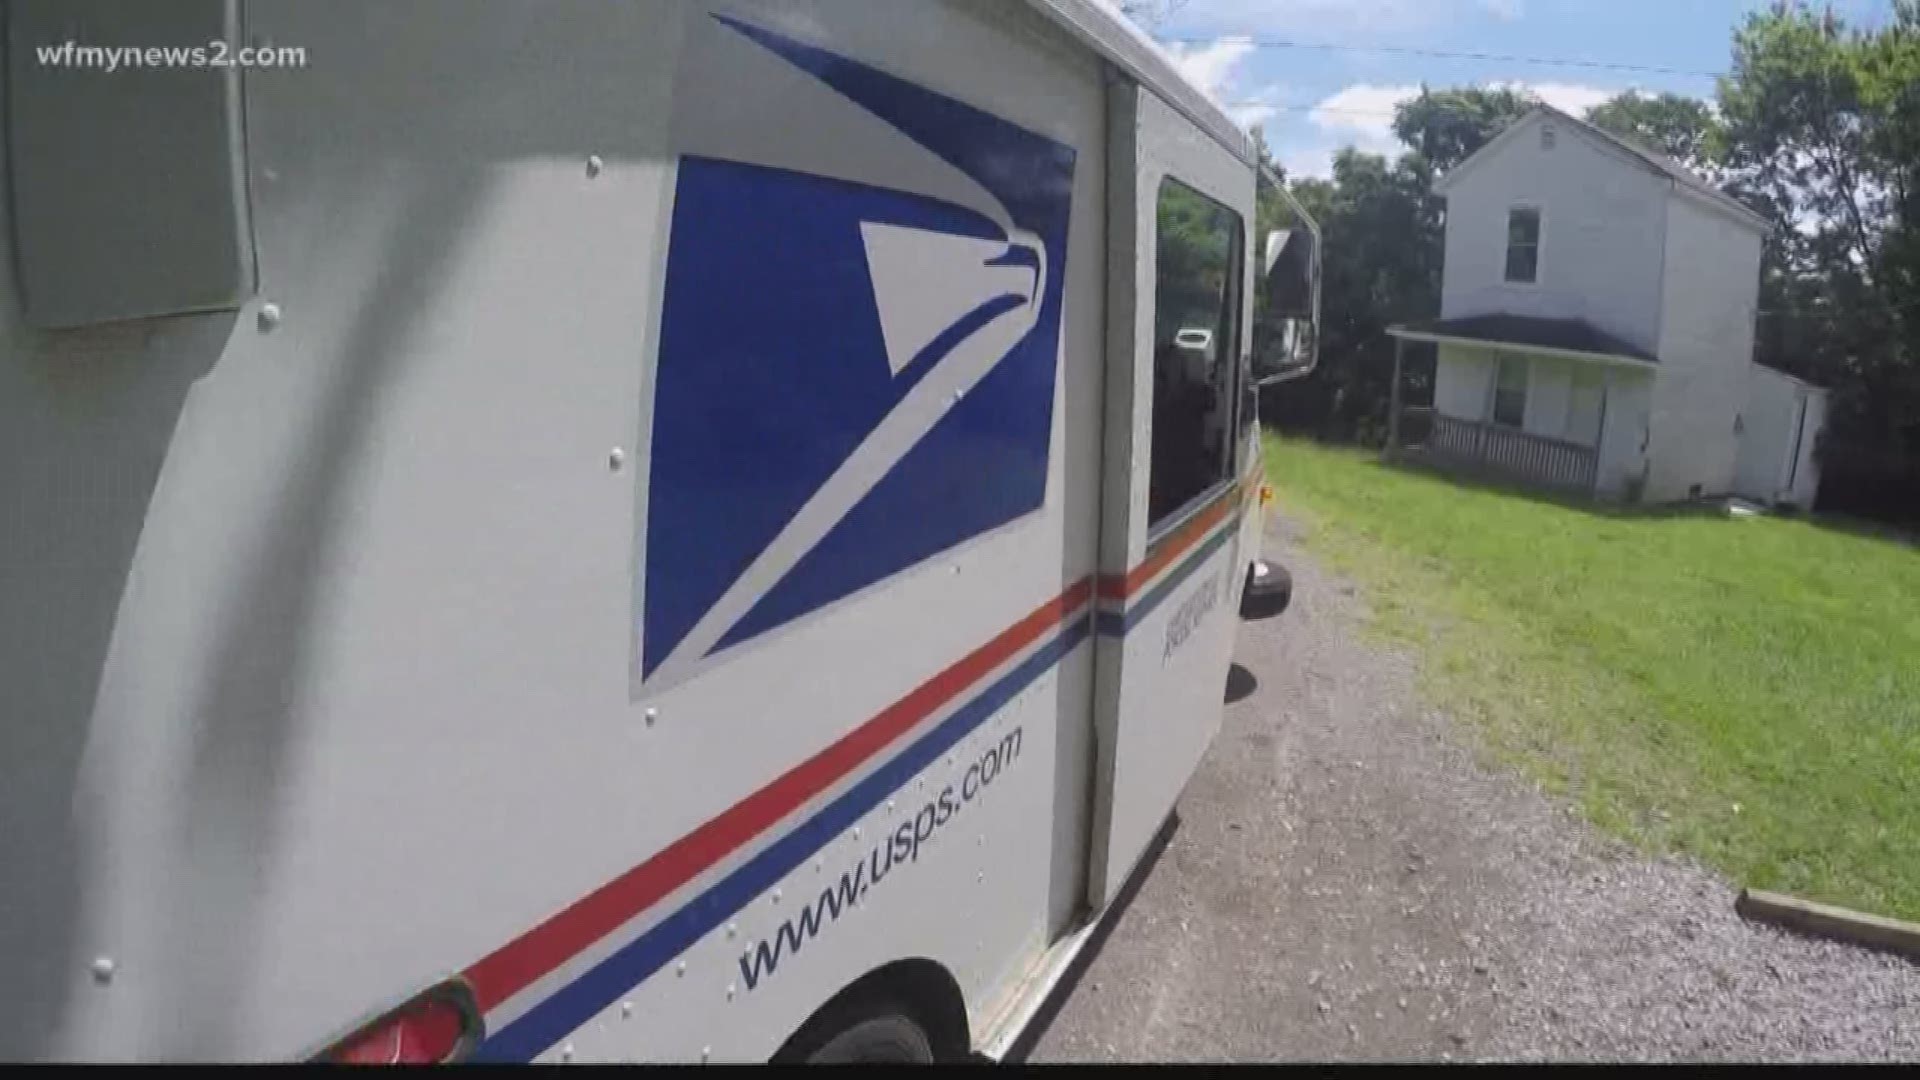 It chased a mail carrier and the whole neighborhood was going to have to pay for new mailboxes until 2WTK got involved.